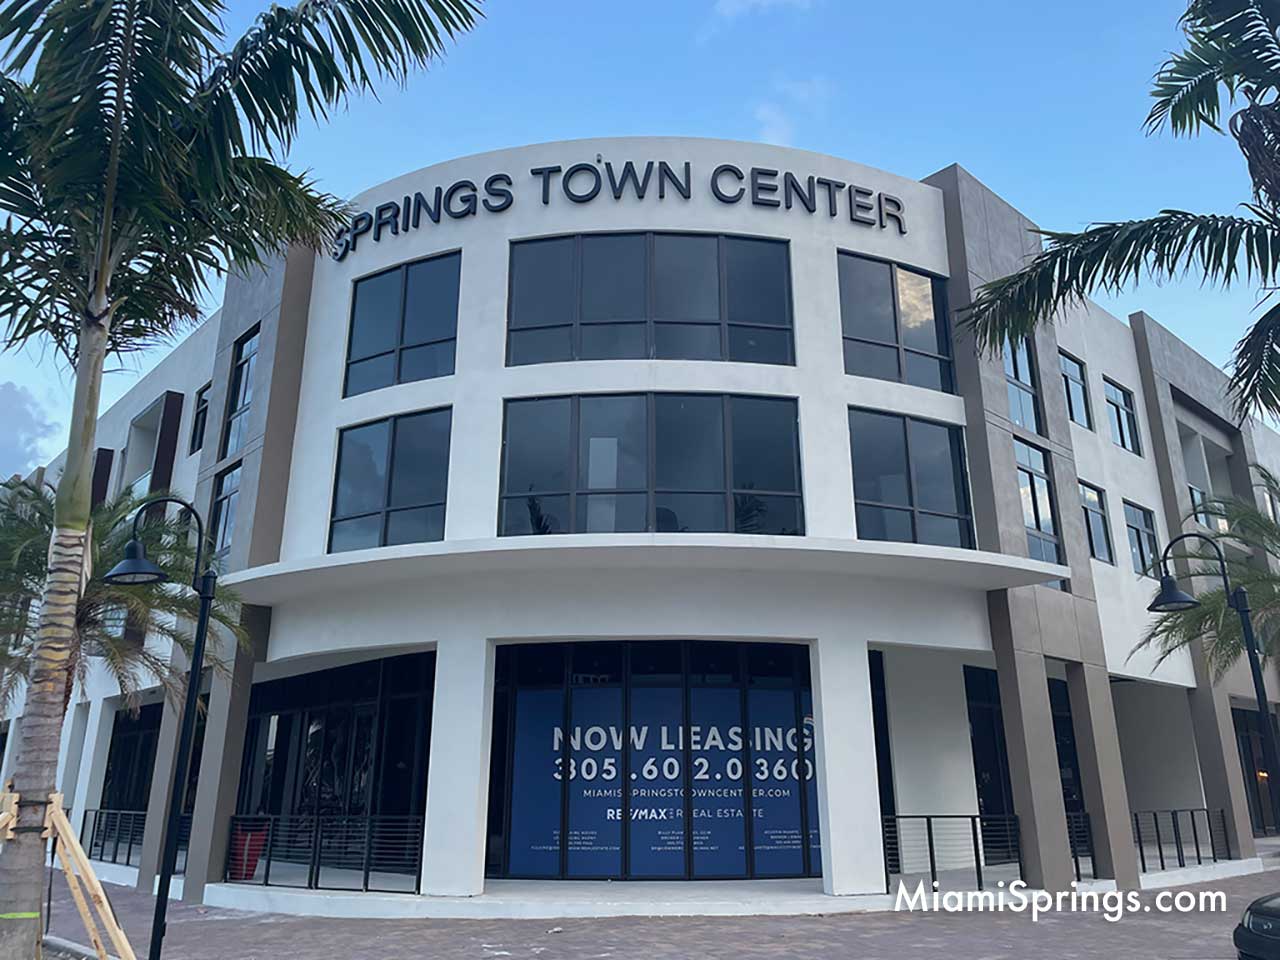 Miami Springs Town Center at One Curtiss Parkway, Miami Springs, Florida (Photo Credit: MiamiSprings.com)